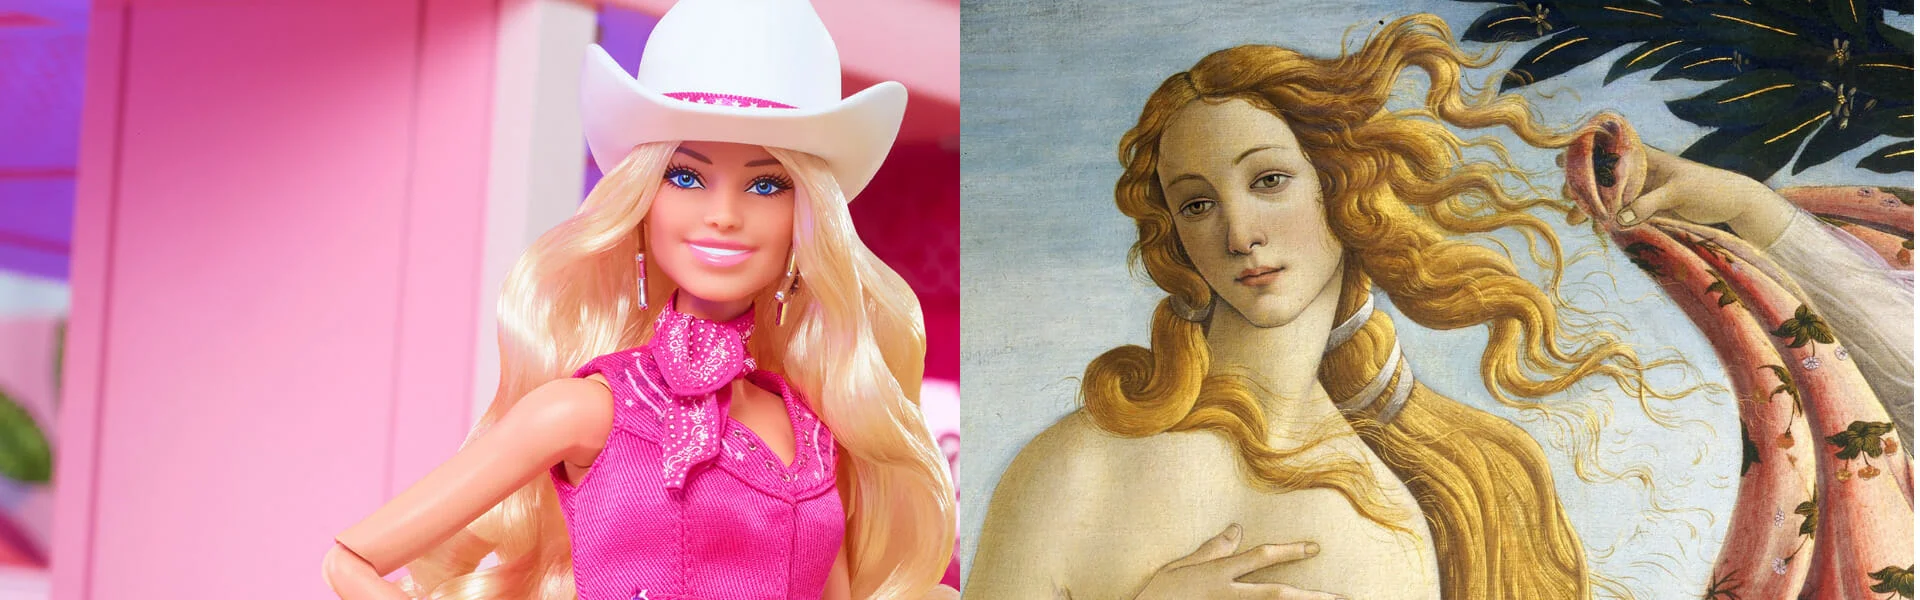 Barbie and the Birth of Venus | Beauty icons through the ages